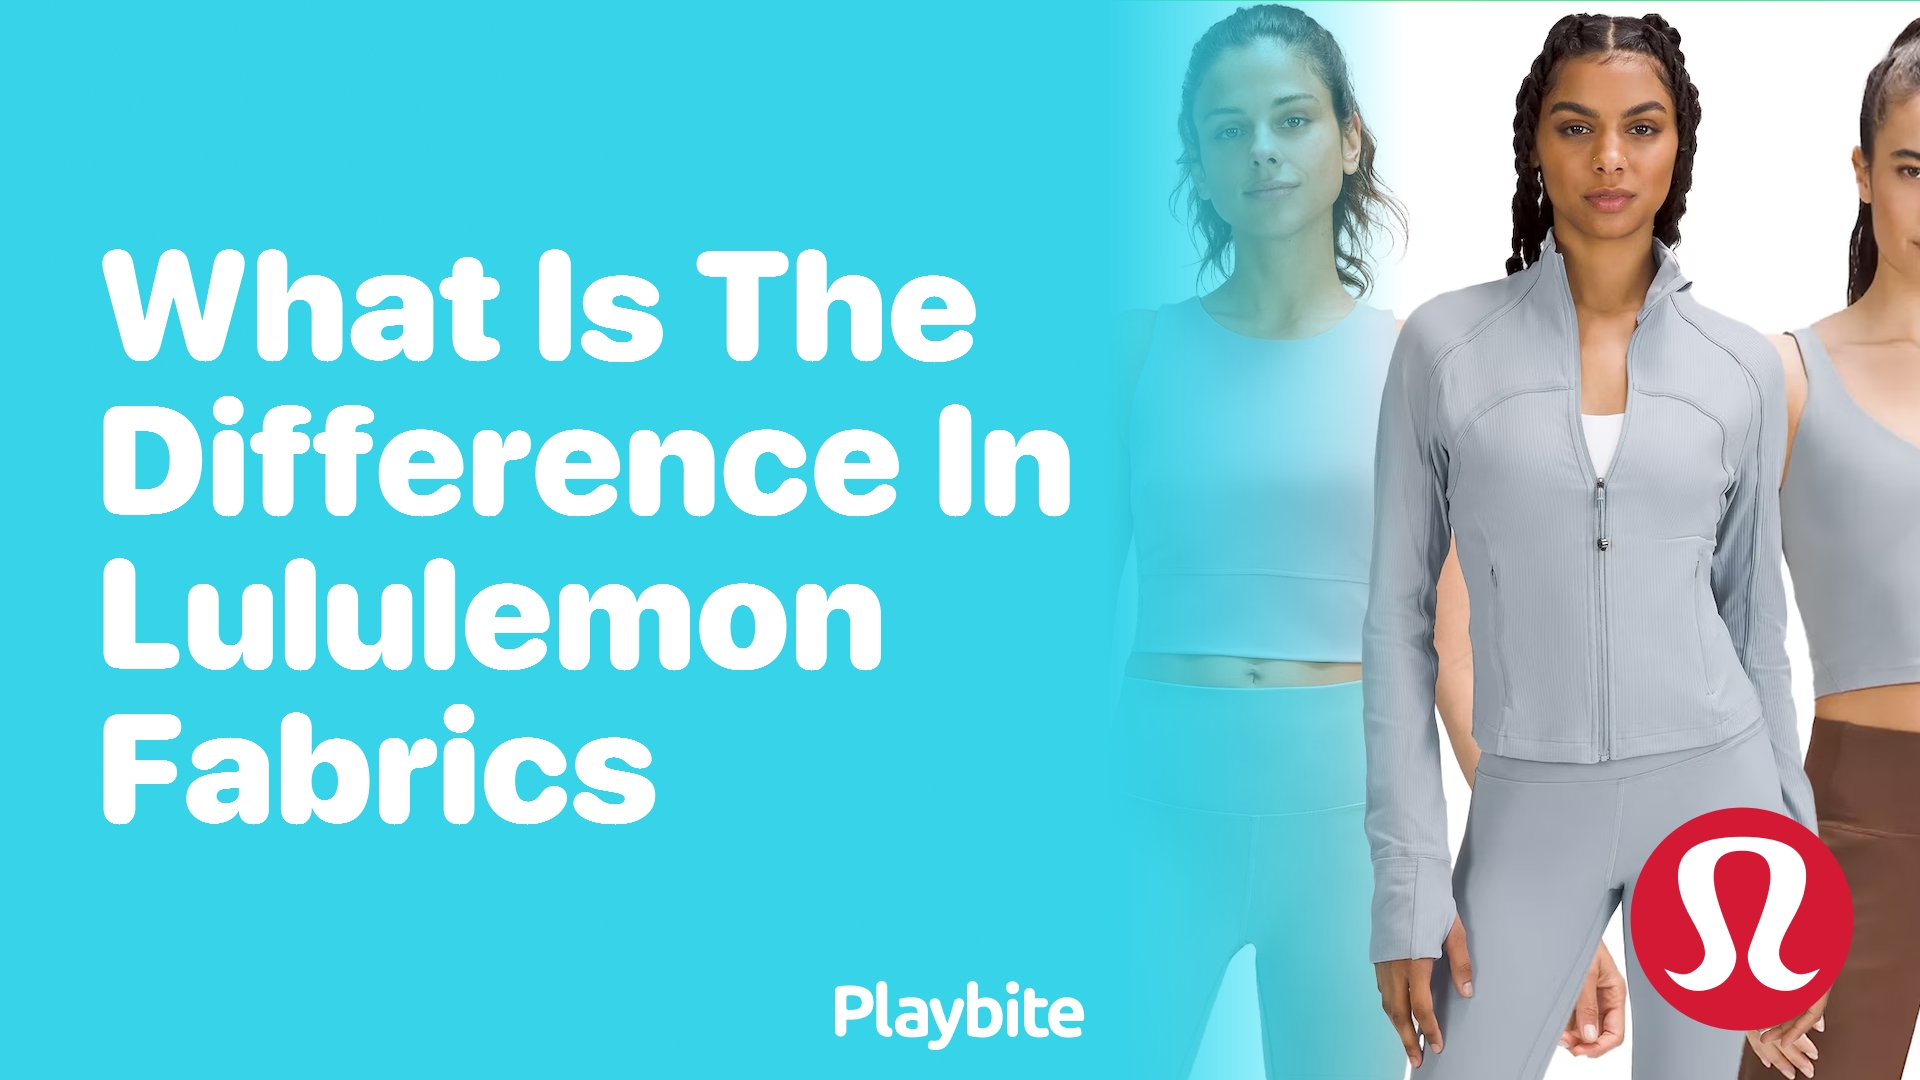 What is the Difference in Lululemon Fabrics? - Playbite